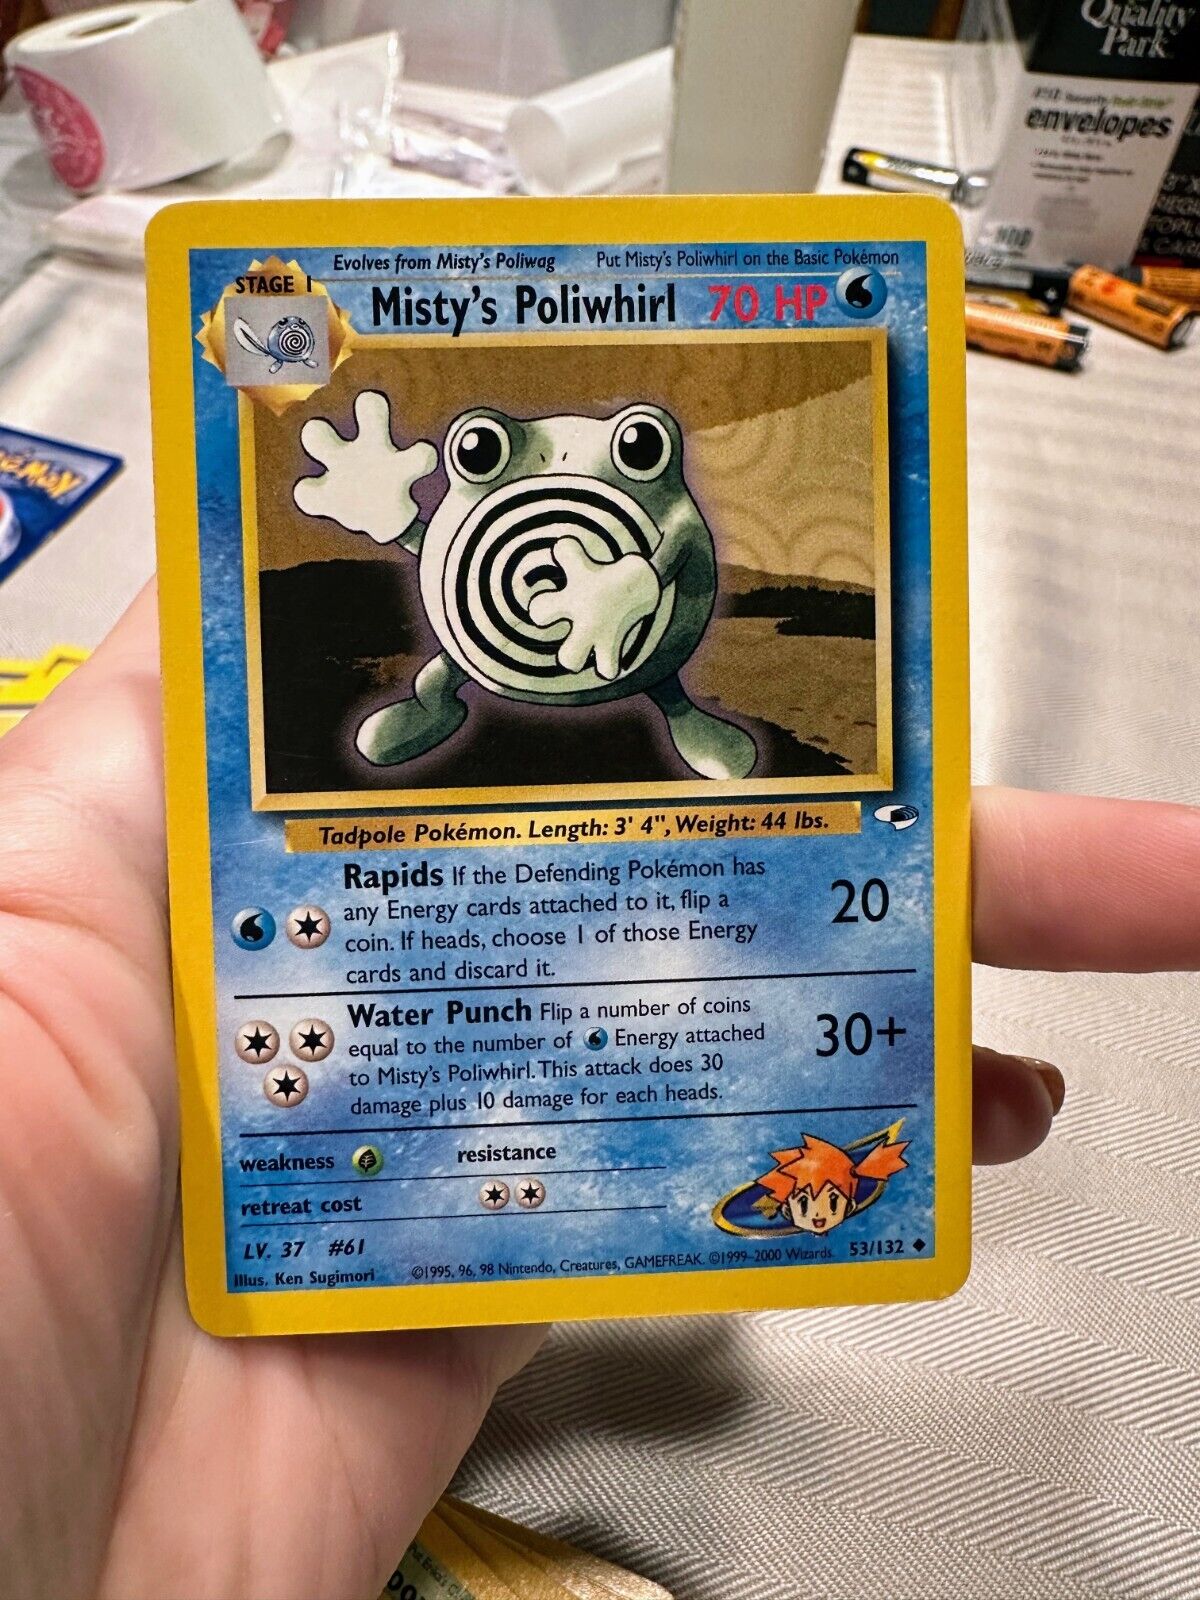 Pokémon TCG Misty's Poliwhirl Gym Heroes 53/132 Regular Unlimited Uncommon